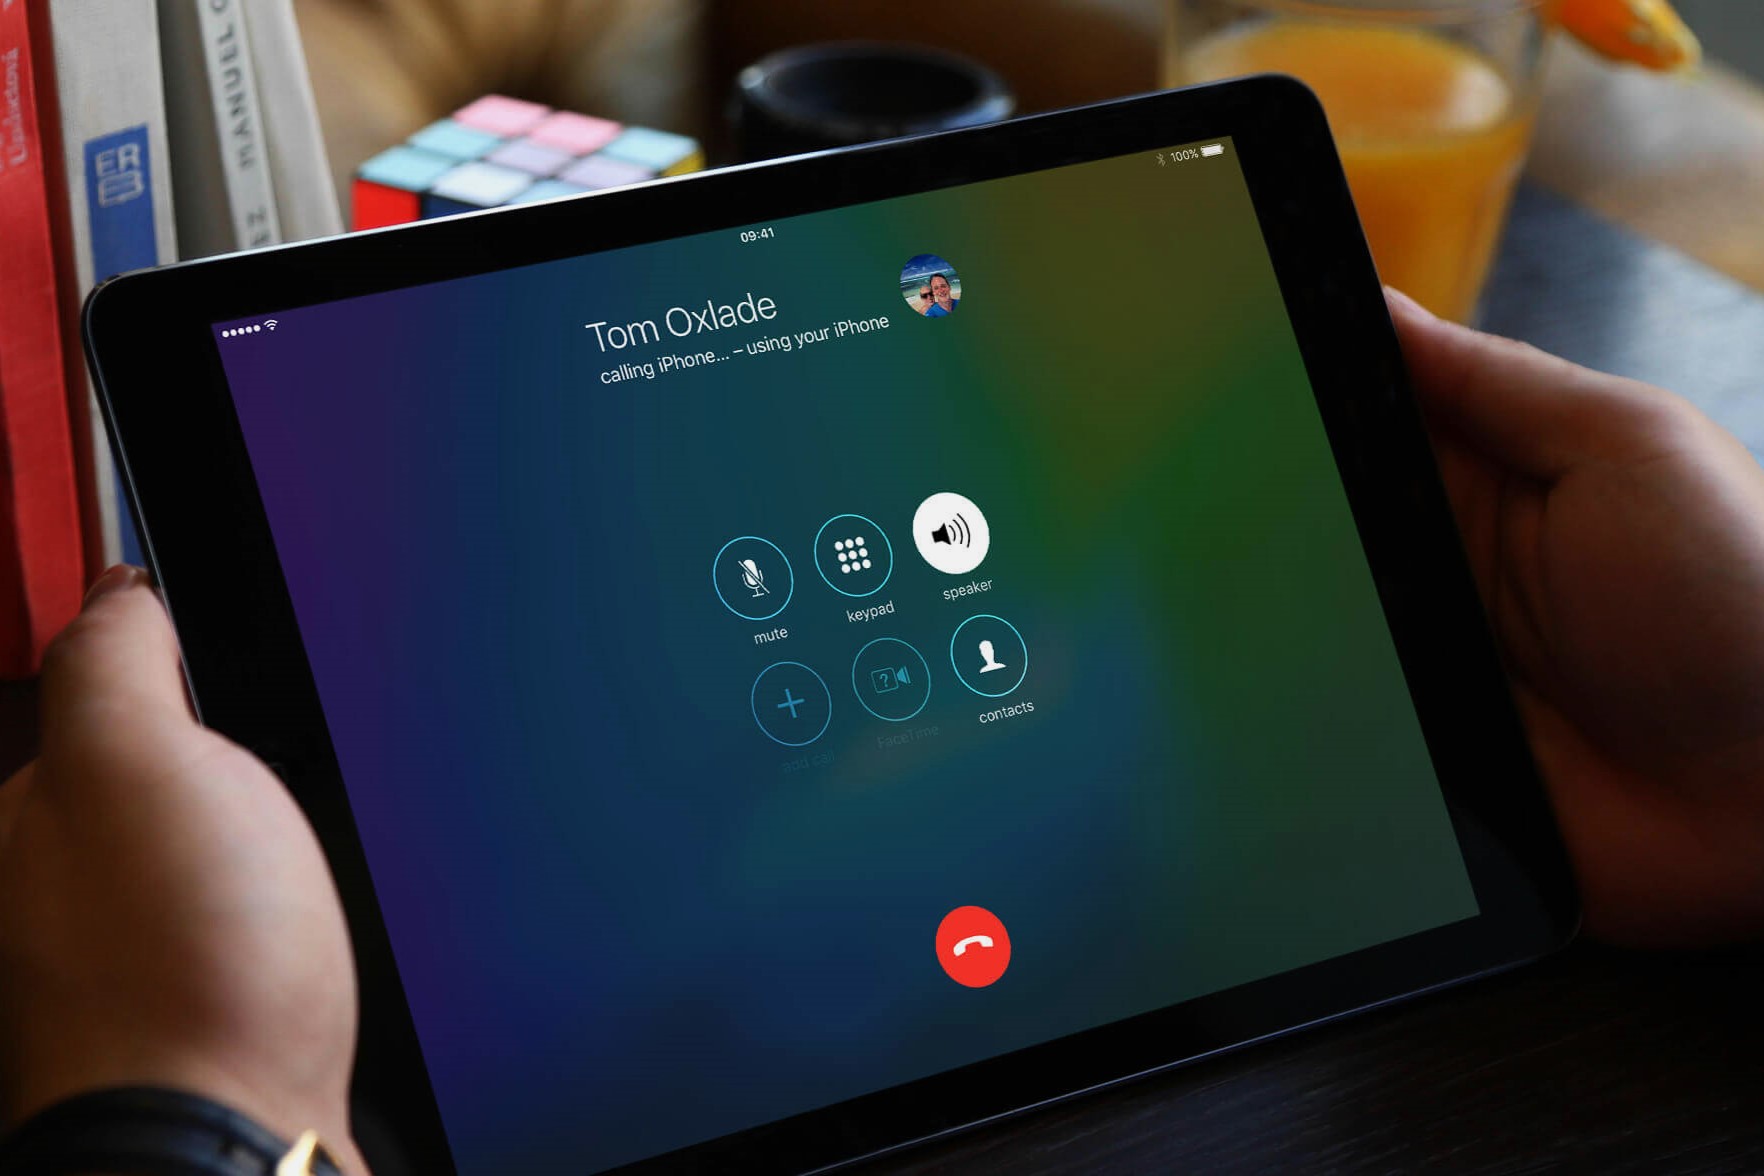 Making Phone Calls From IPad With SIM Card